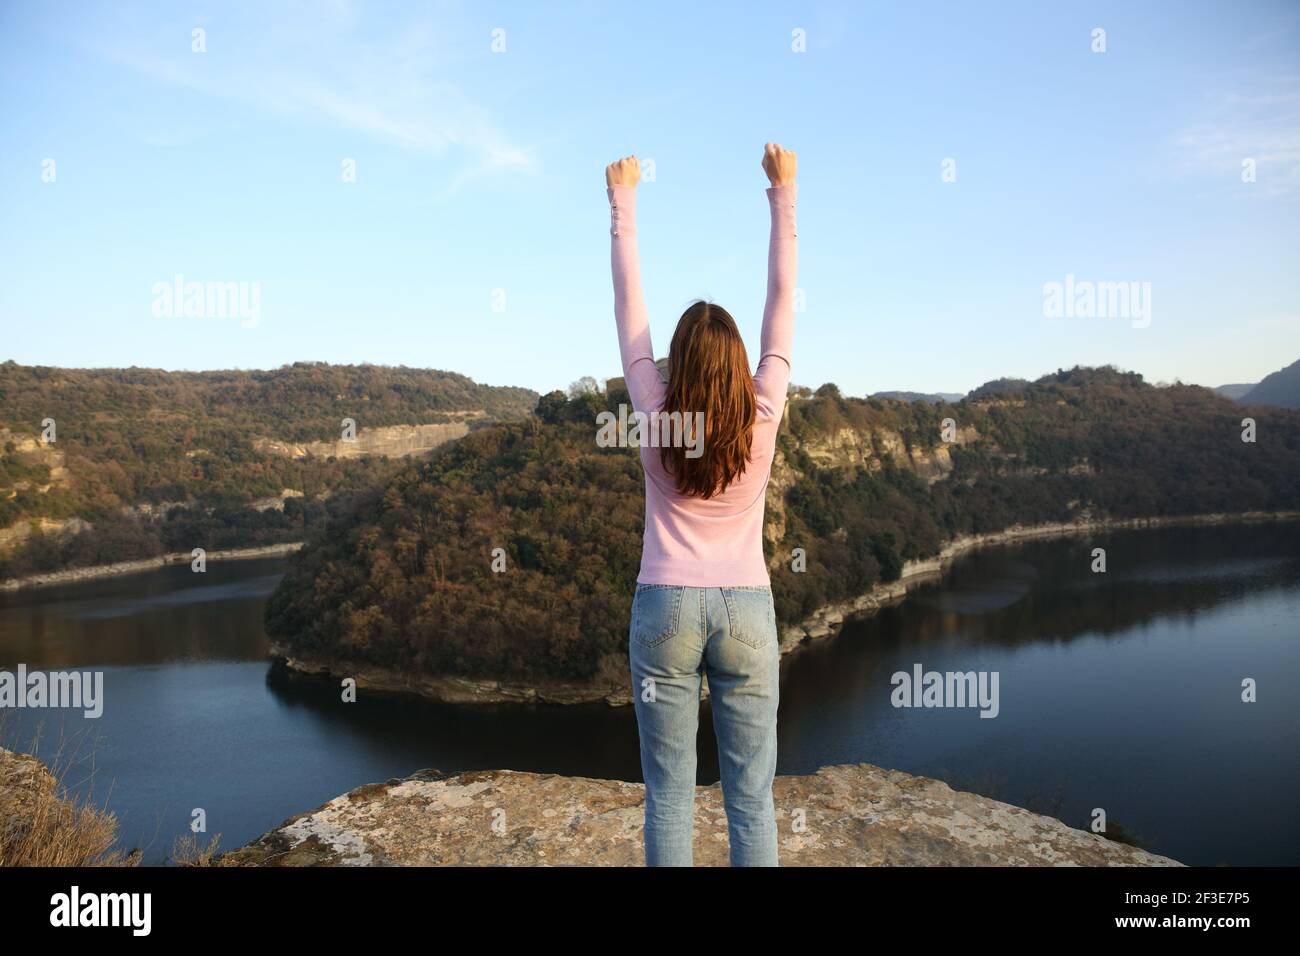 Back view portrait of a woman raising arms celebrating vacation in a river Stock Photo